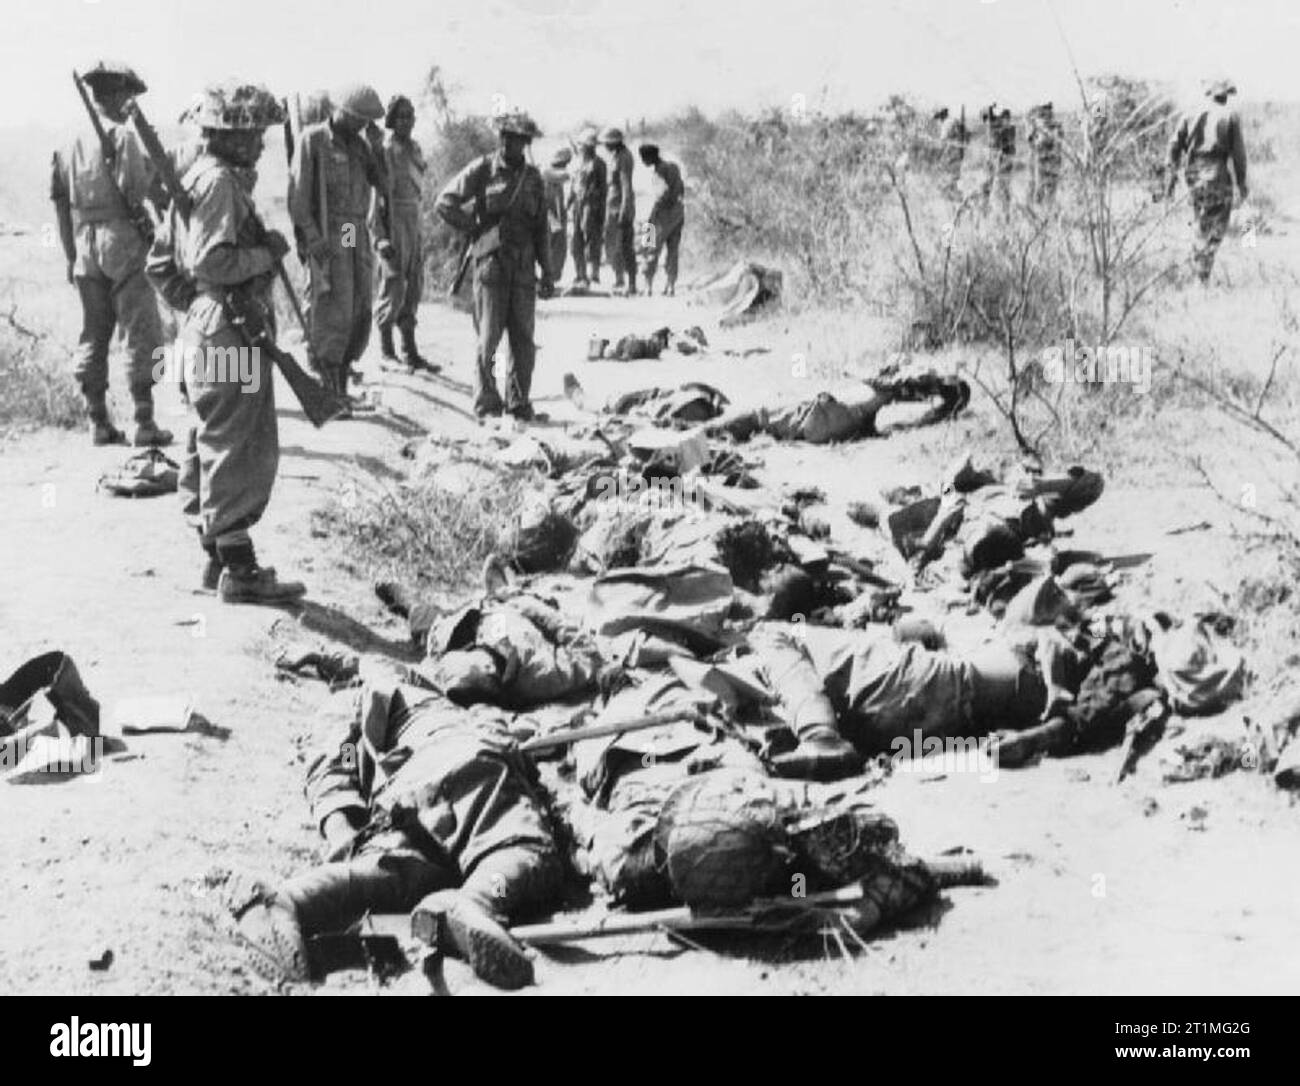 The War in the Far East- the Burma Campaign 1941-1945 The Campaign in Mandalay February - March 1945: Japanese dead lie on the ground after an unsuccessful counter attack at Meiktila. Stock Photo